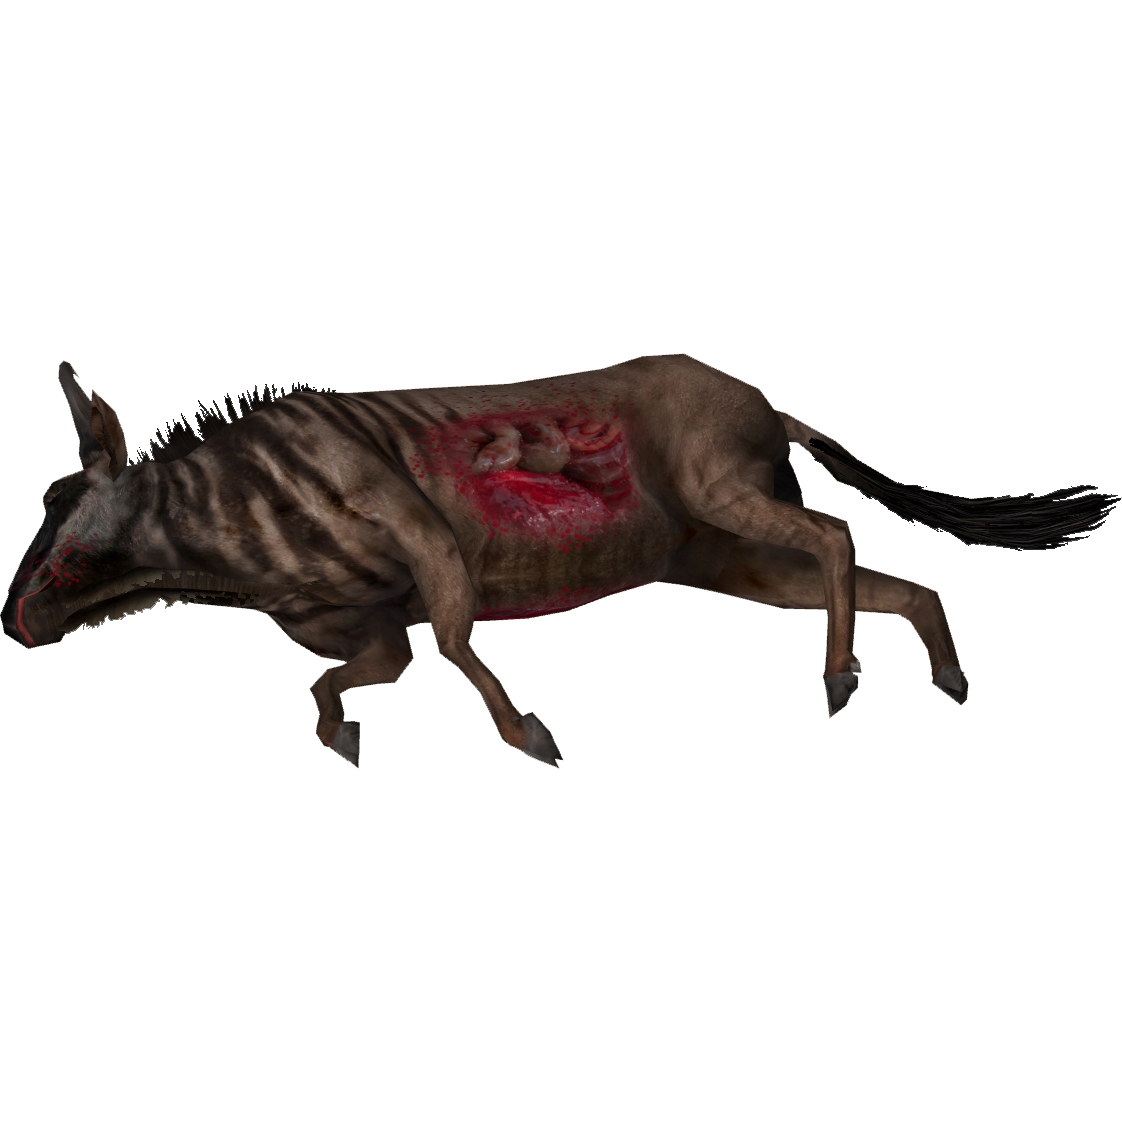 Dead Animal PNG - 170566